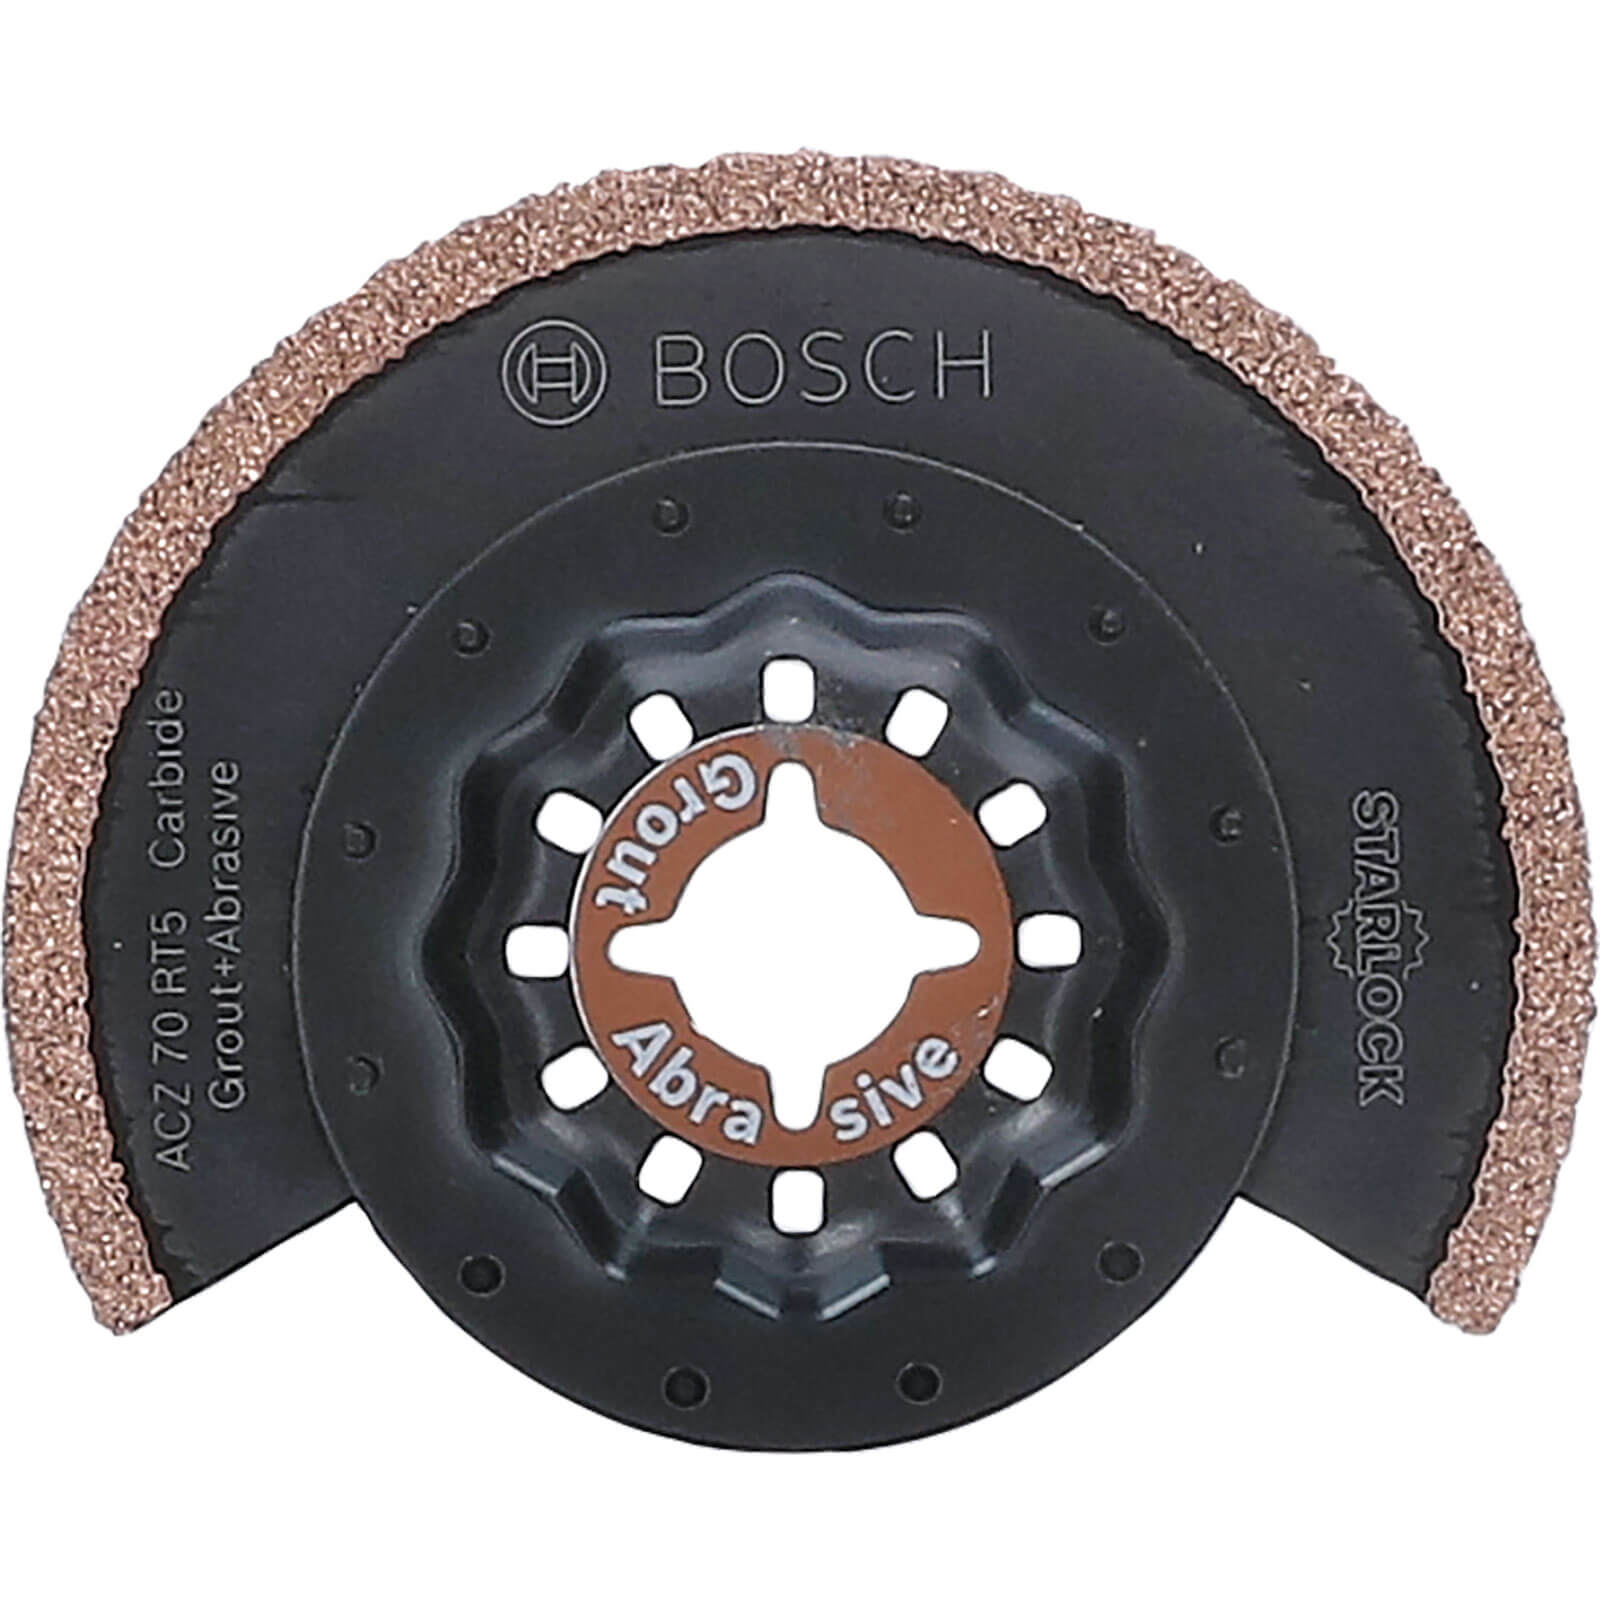 Photo of Bosch Acz 70 Rt5 Thin Grout Oscillating Multi Tool Segment Saw Blade 70mm Pack Of 10